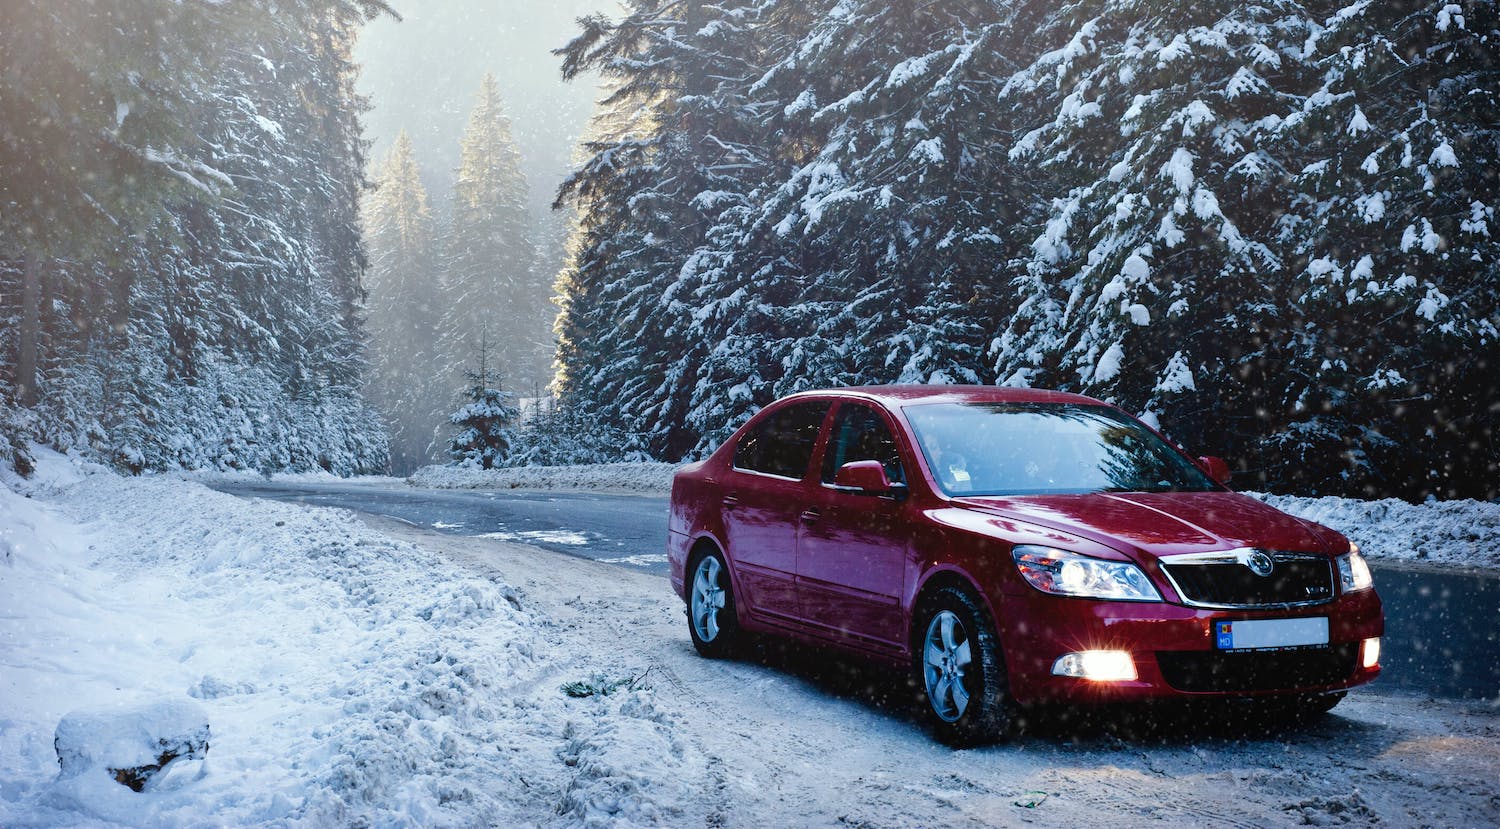 Winter Car Rental Tips: Save Money and Stay Safe on the Roads